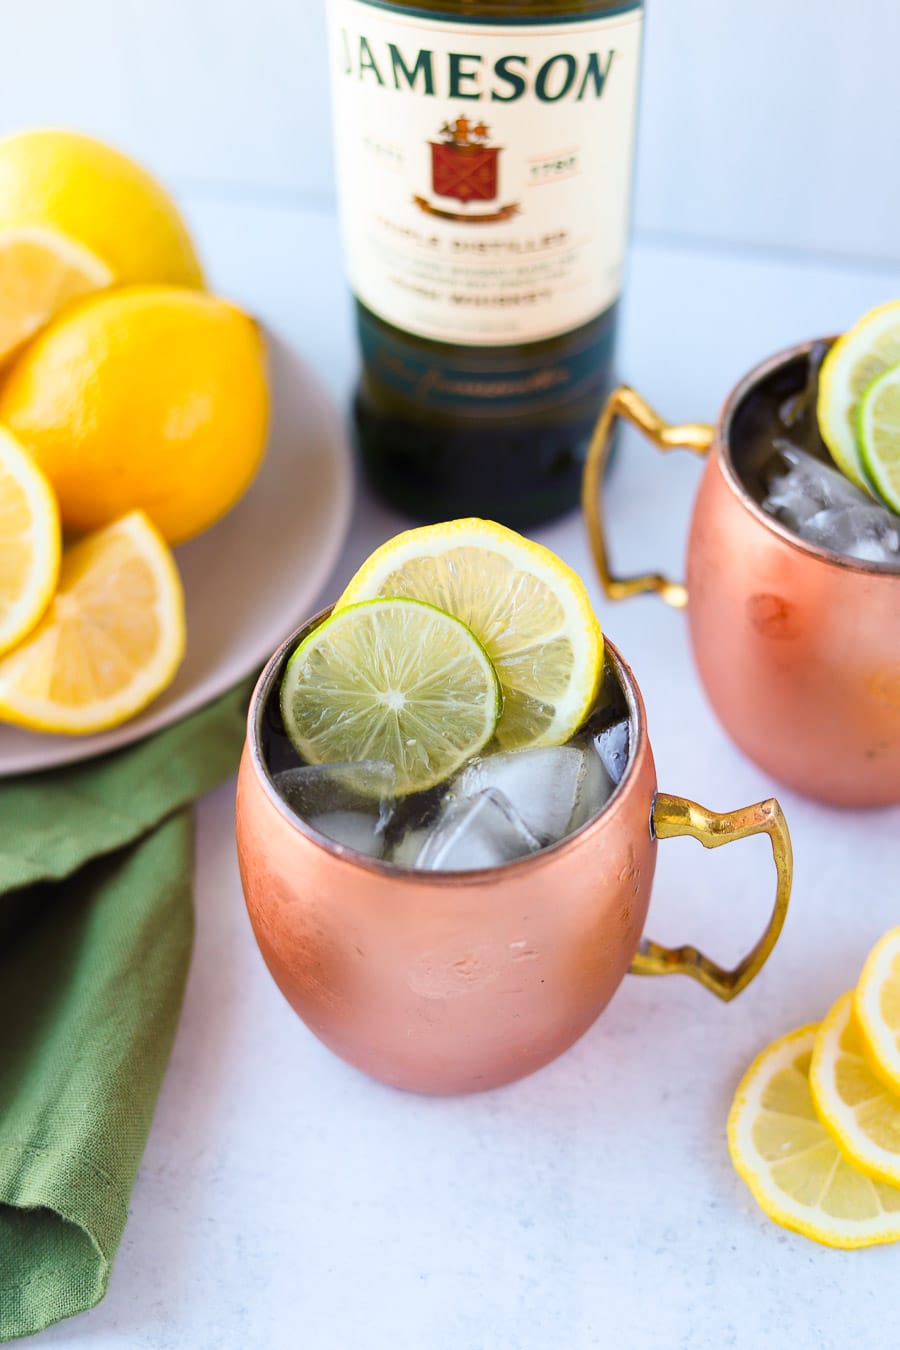 This whiskey mule, otherwise known as the Irish Mule is one of my favorite Moscow mule variations. The combination of Irish Whiskey, fresh lemon, and ginger beer is so refreshing.